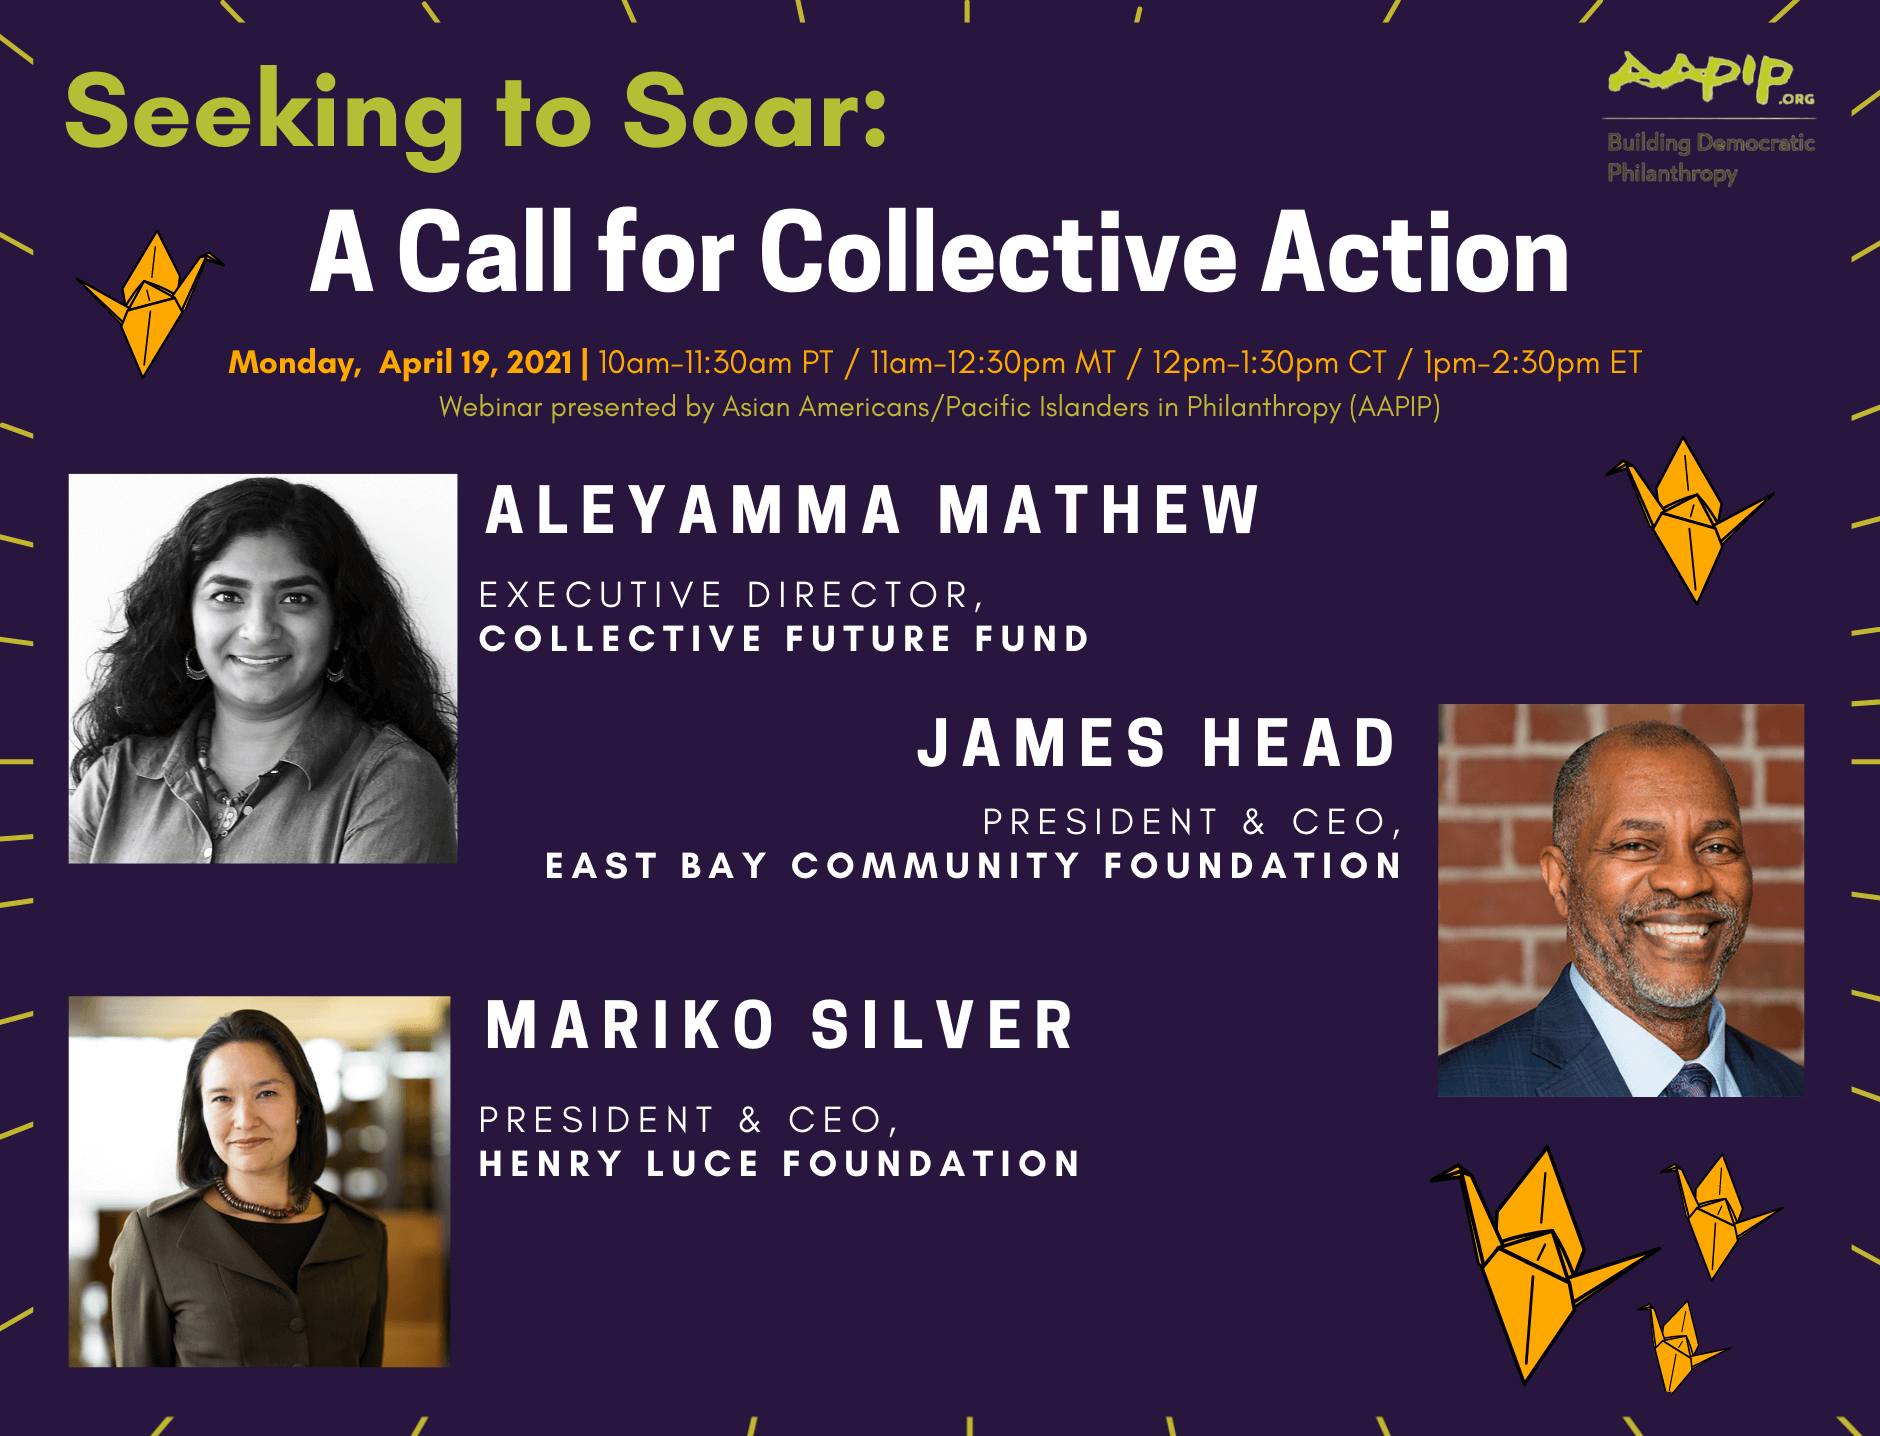 Seeking to Soar: A Call for Collective Action. Monday, April 19, 2021 (10-11:30am PT / 11-12:30pm MT / 12-1:30pm CT / 1-2:30pm ET). Speakers: Aleyamma Mathew, James Head, Mariko Silver.